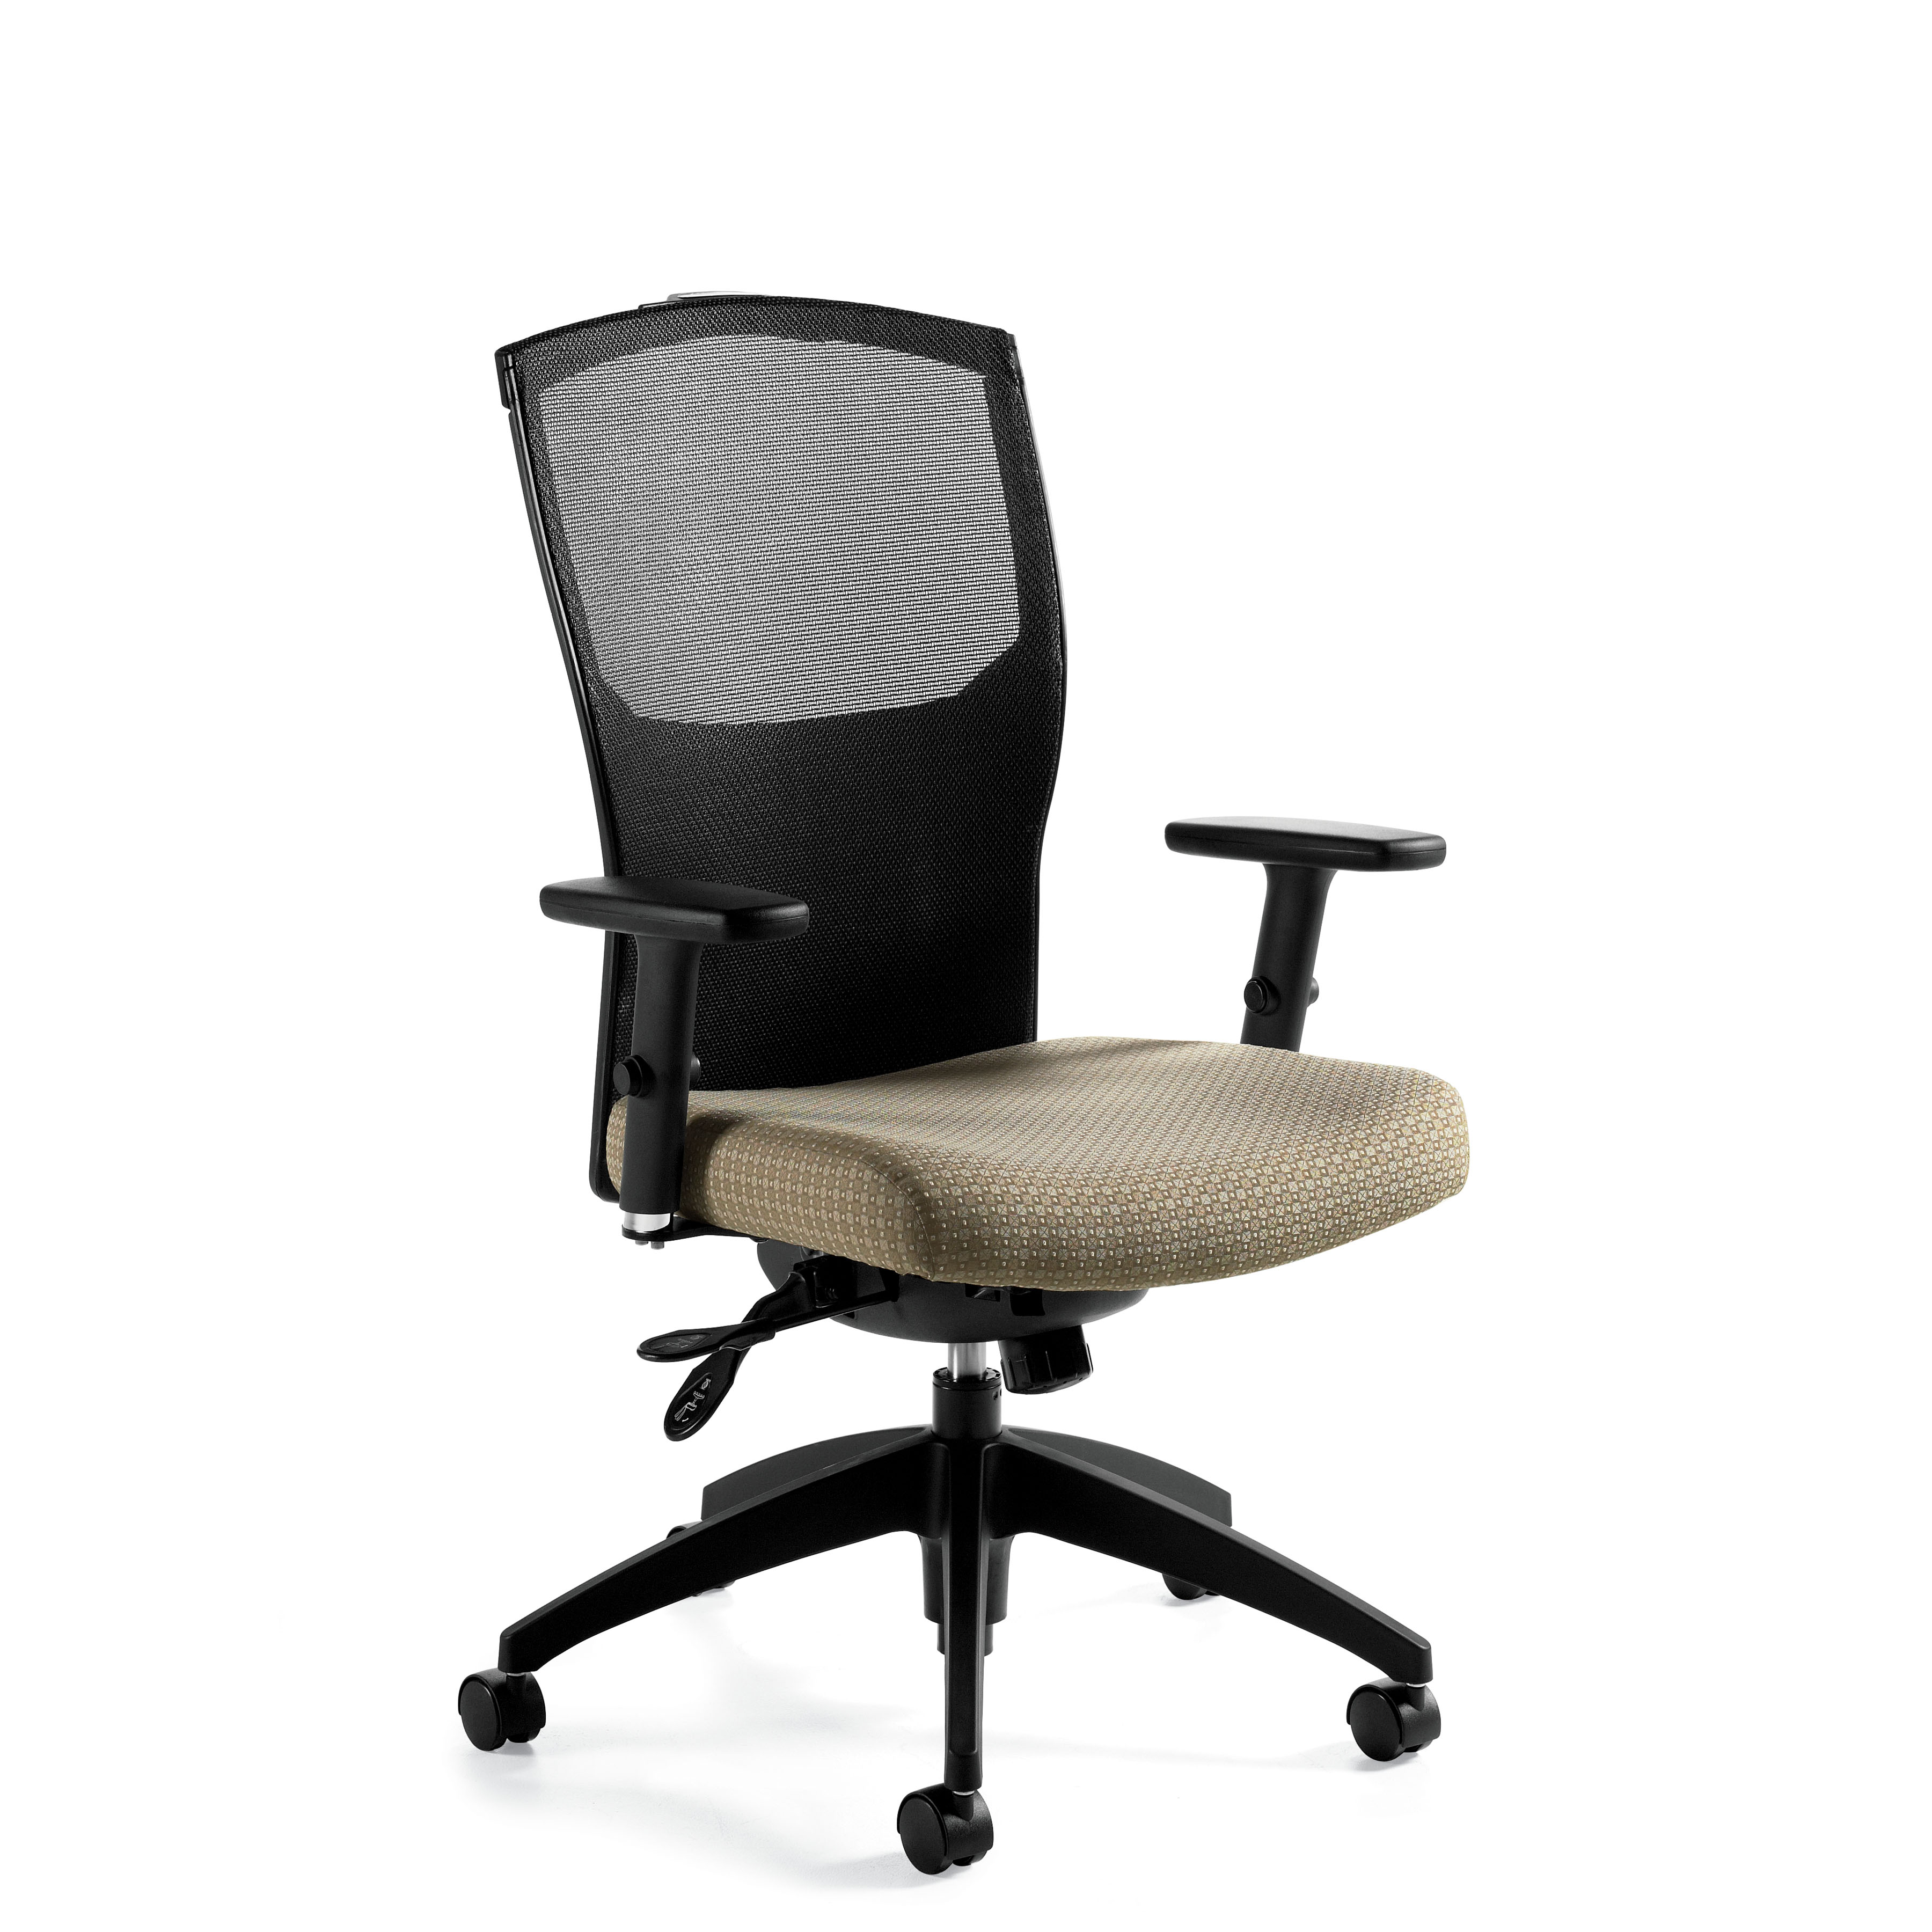 Global Furniture Group, Alero's fully upholstered or breathable mesh back and visually sculptured lumbar adjustment create